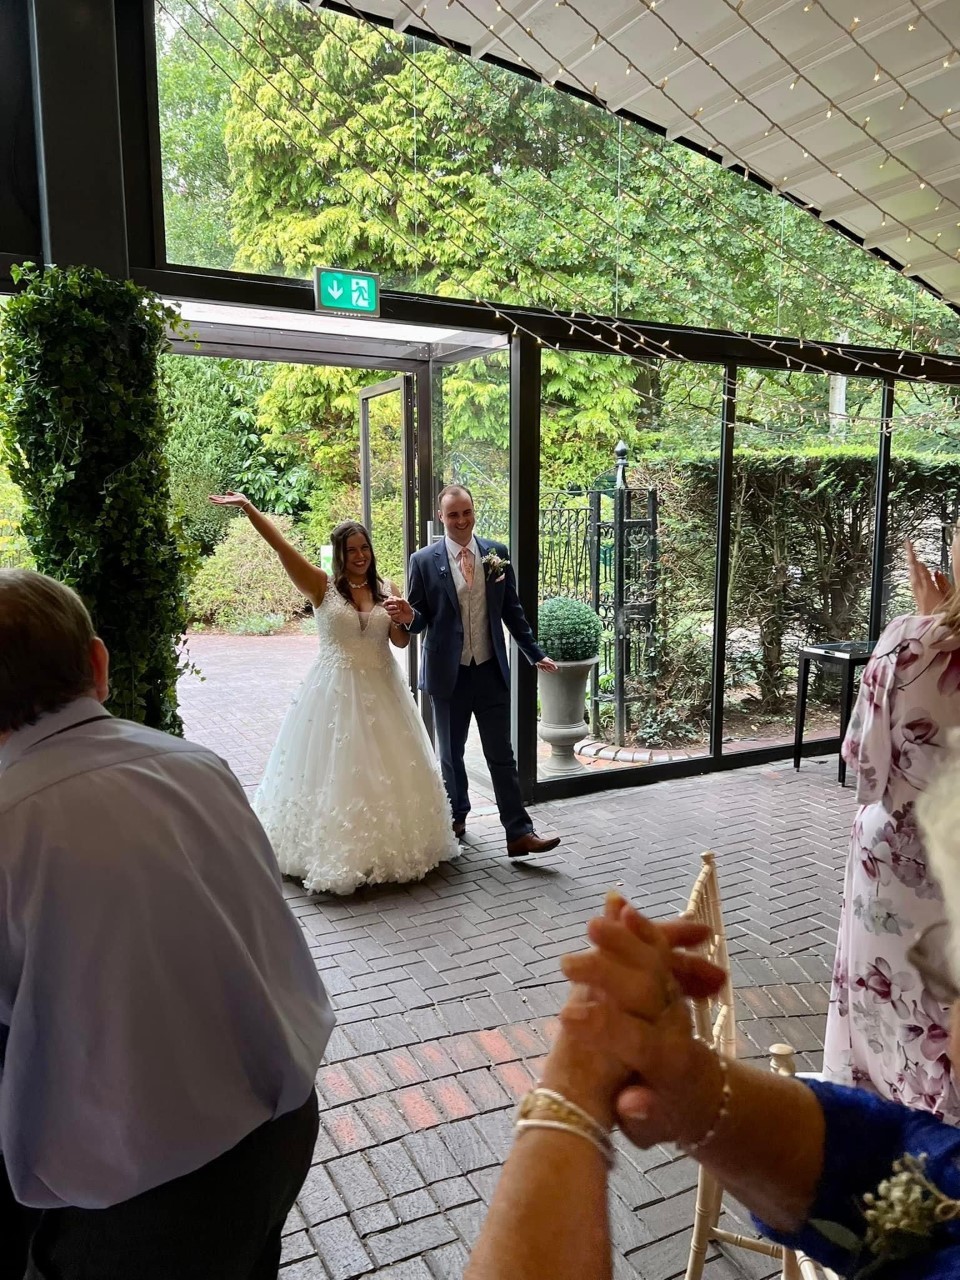 Friends and family celebrated the special day at Delamere Manor in Cuddington